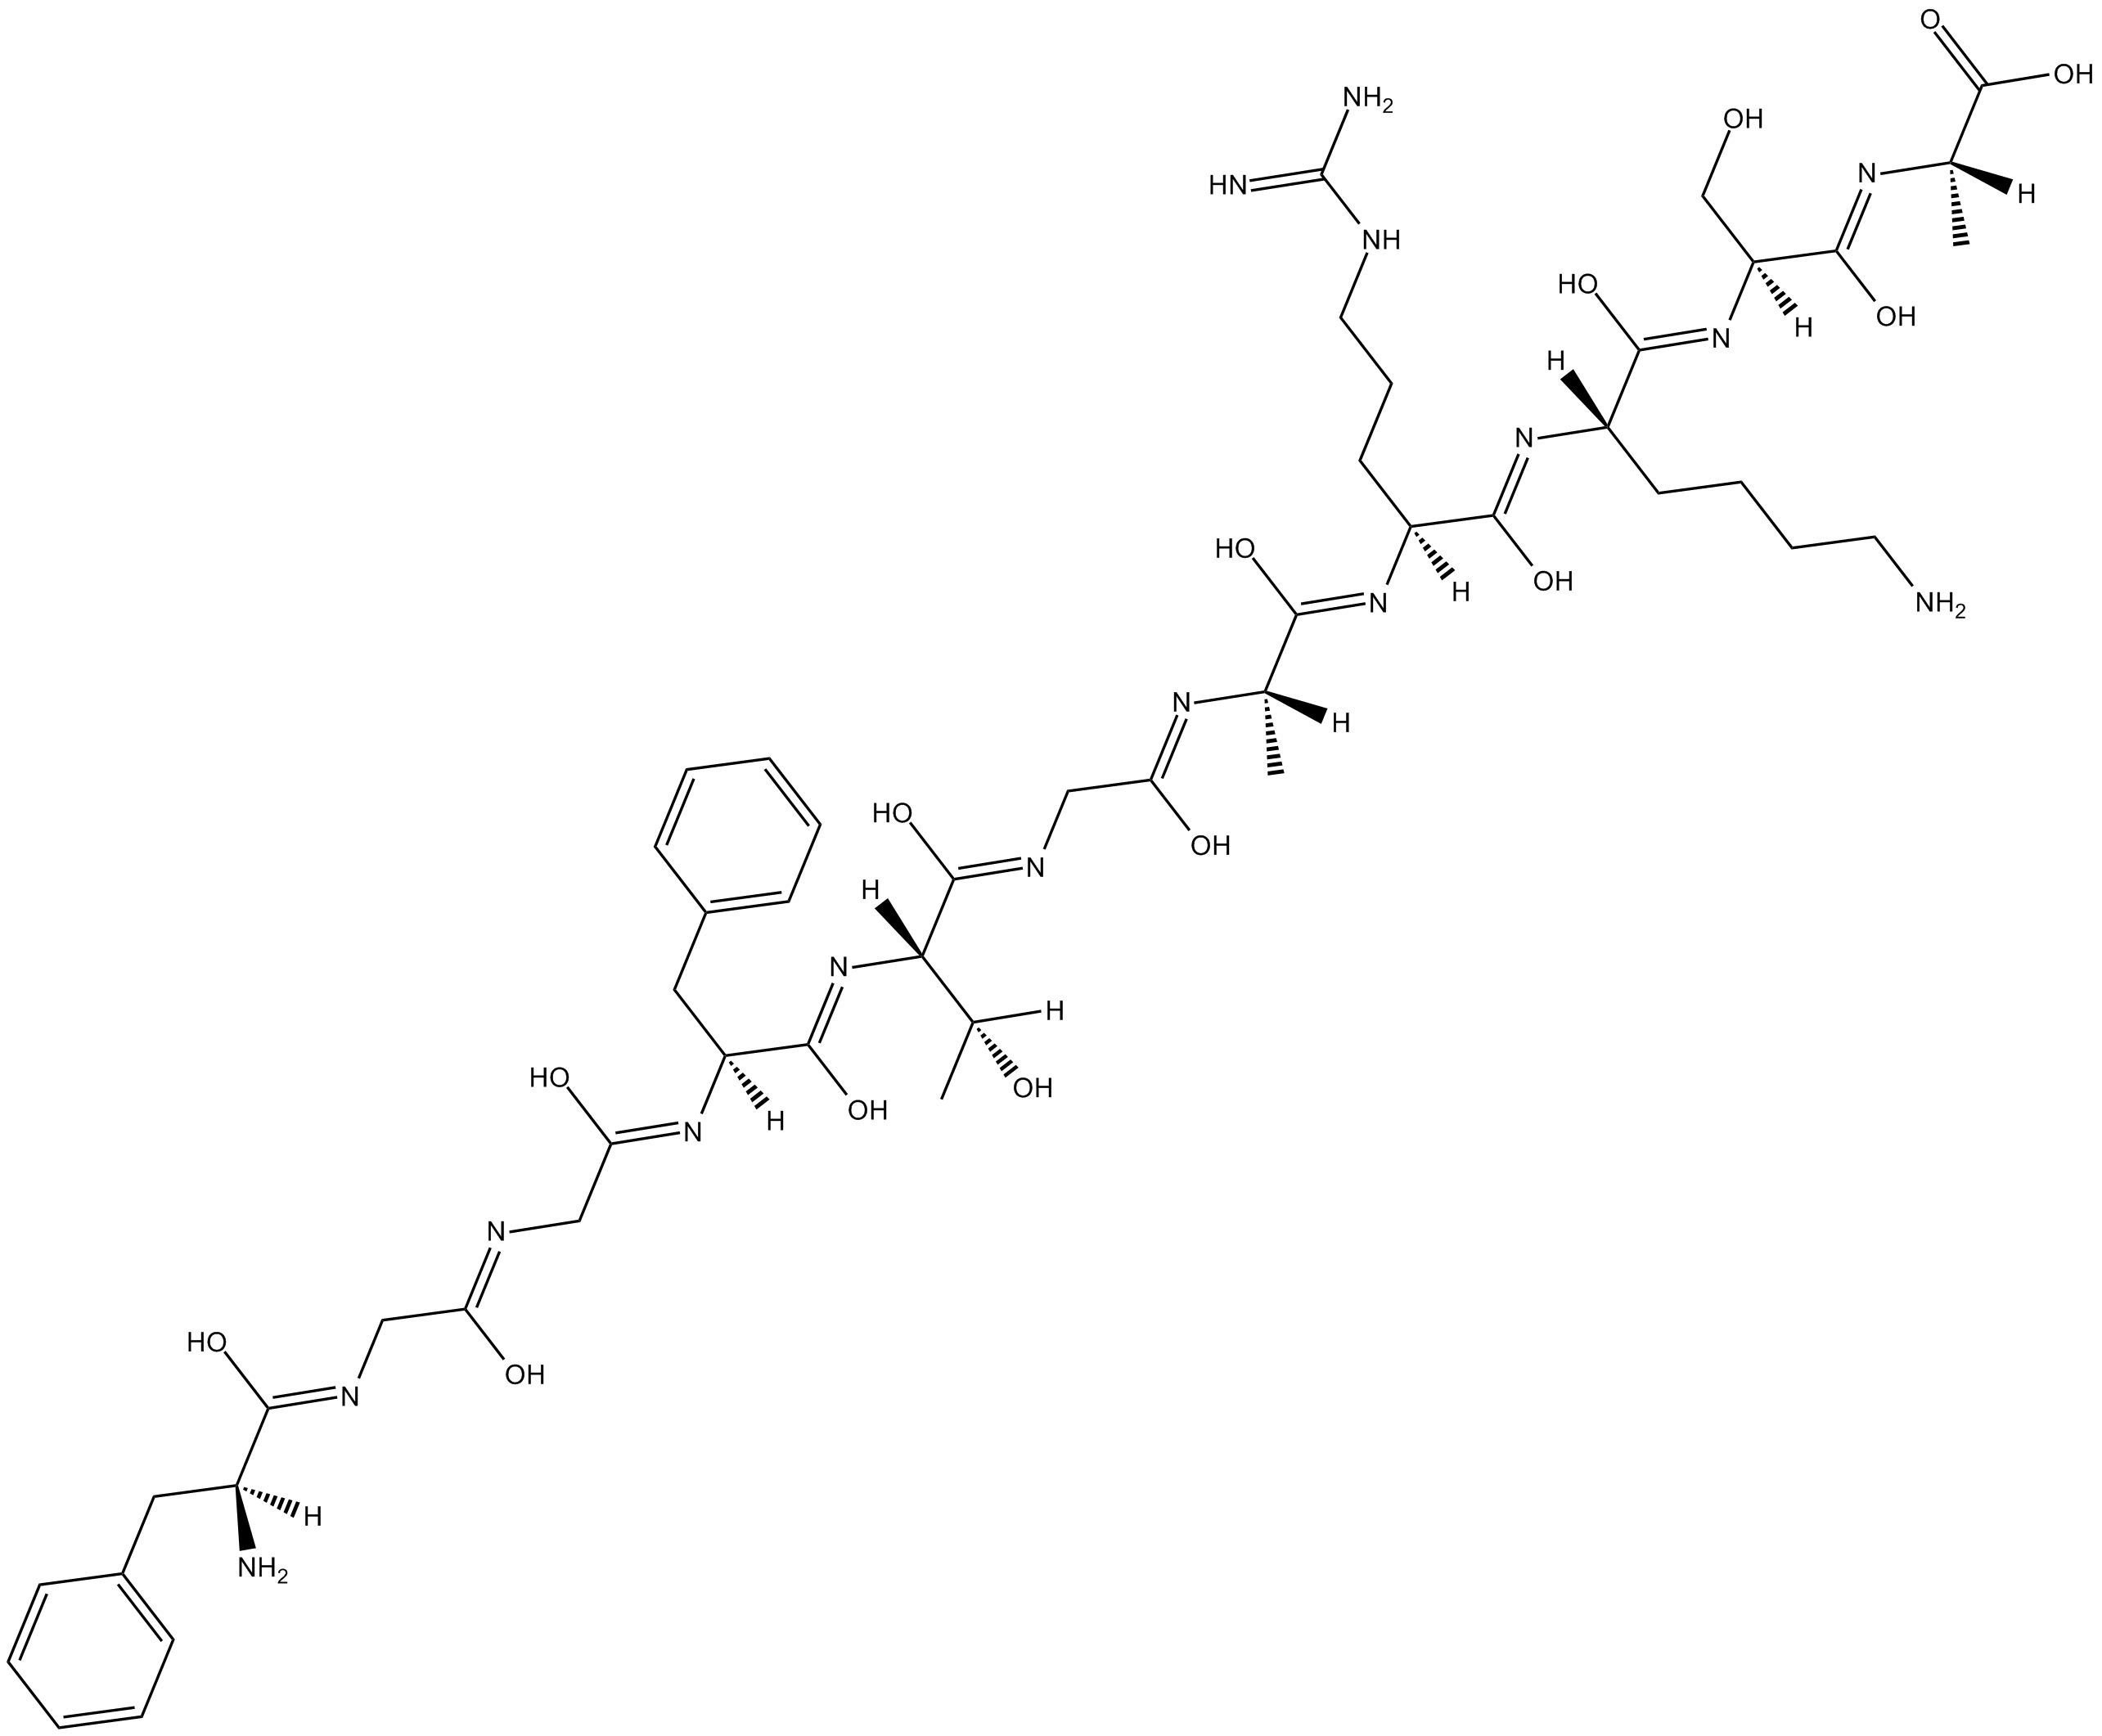 Orphanin FQ (1-11) Chemical Structure